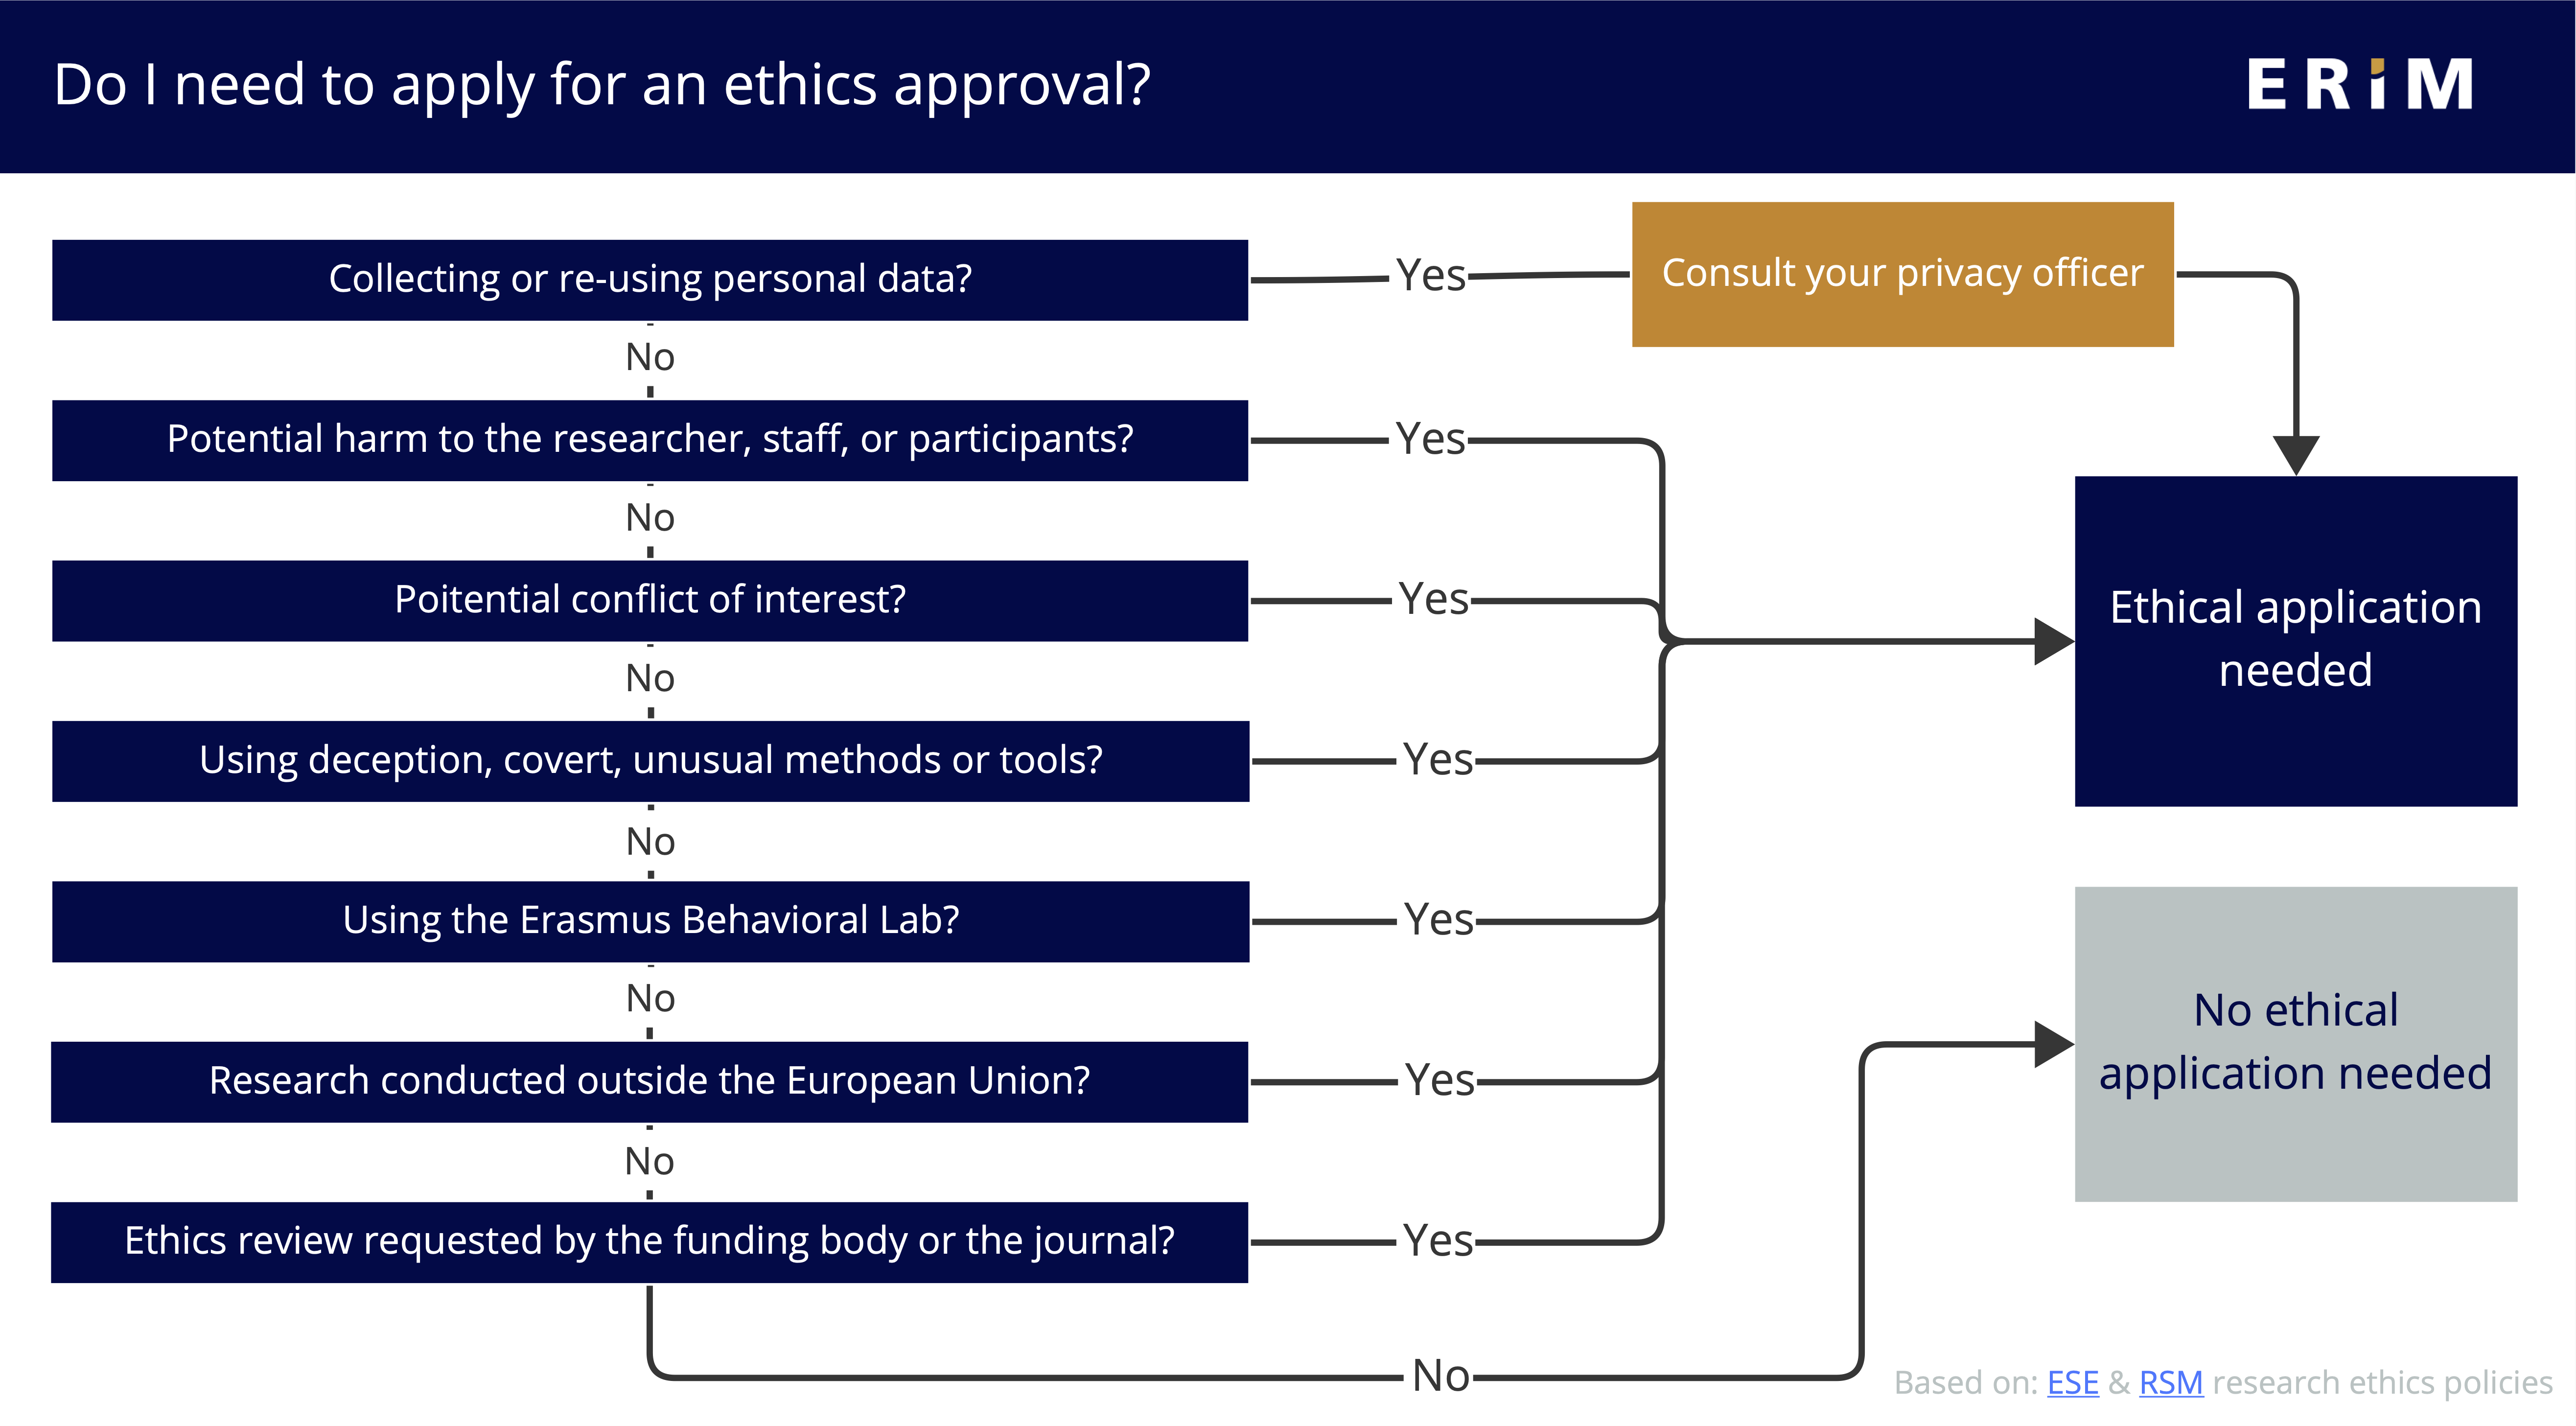 "A decision tree showing when to apply for an ethical approval"